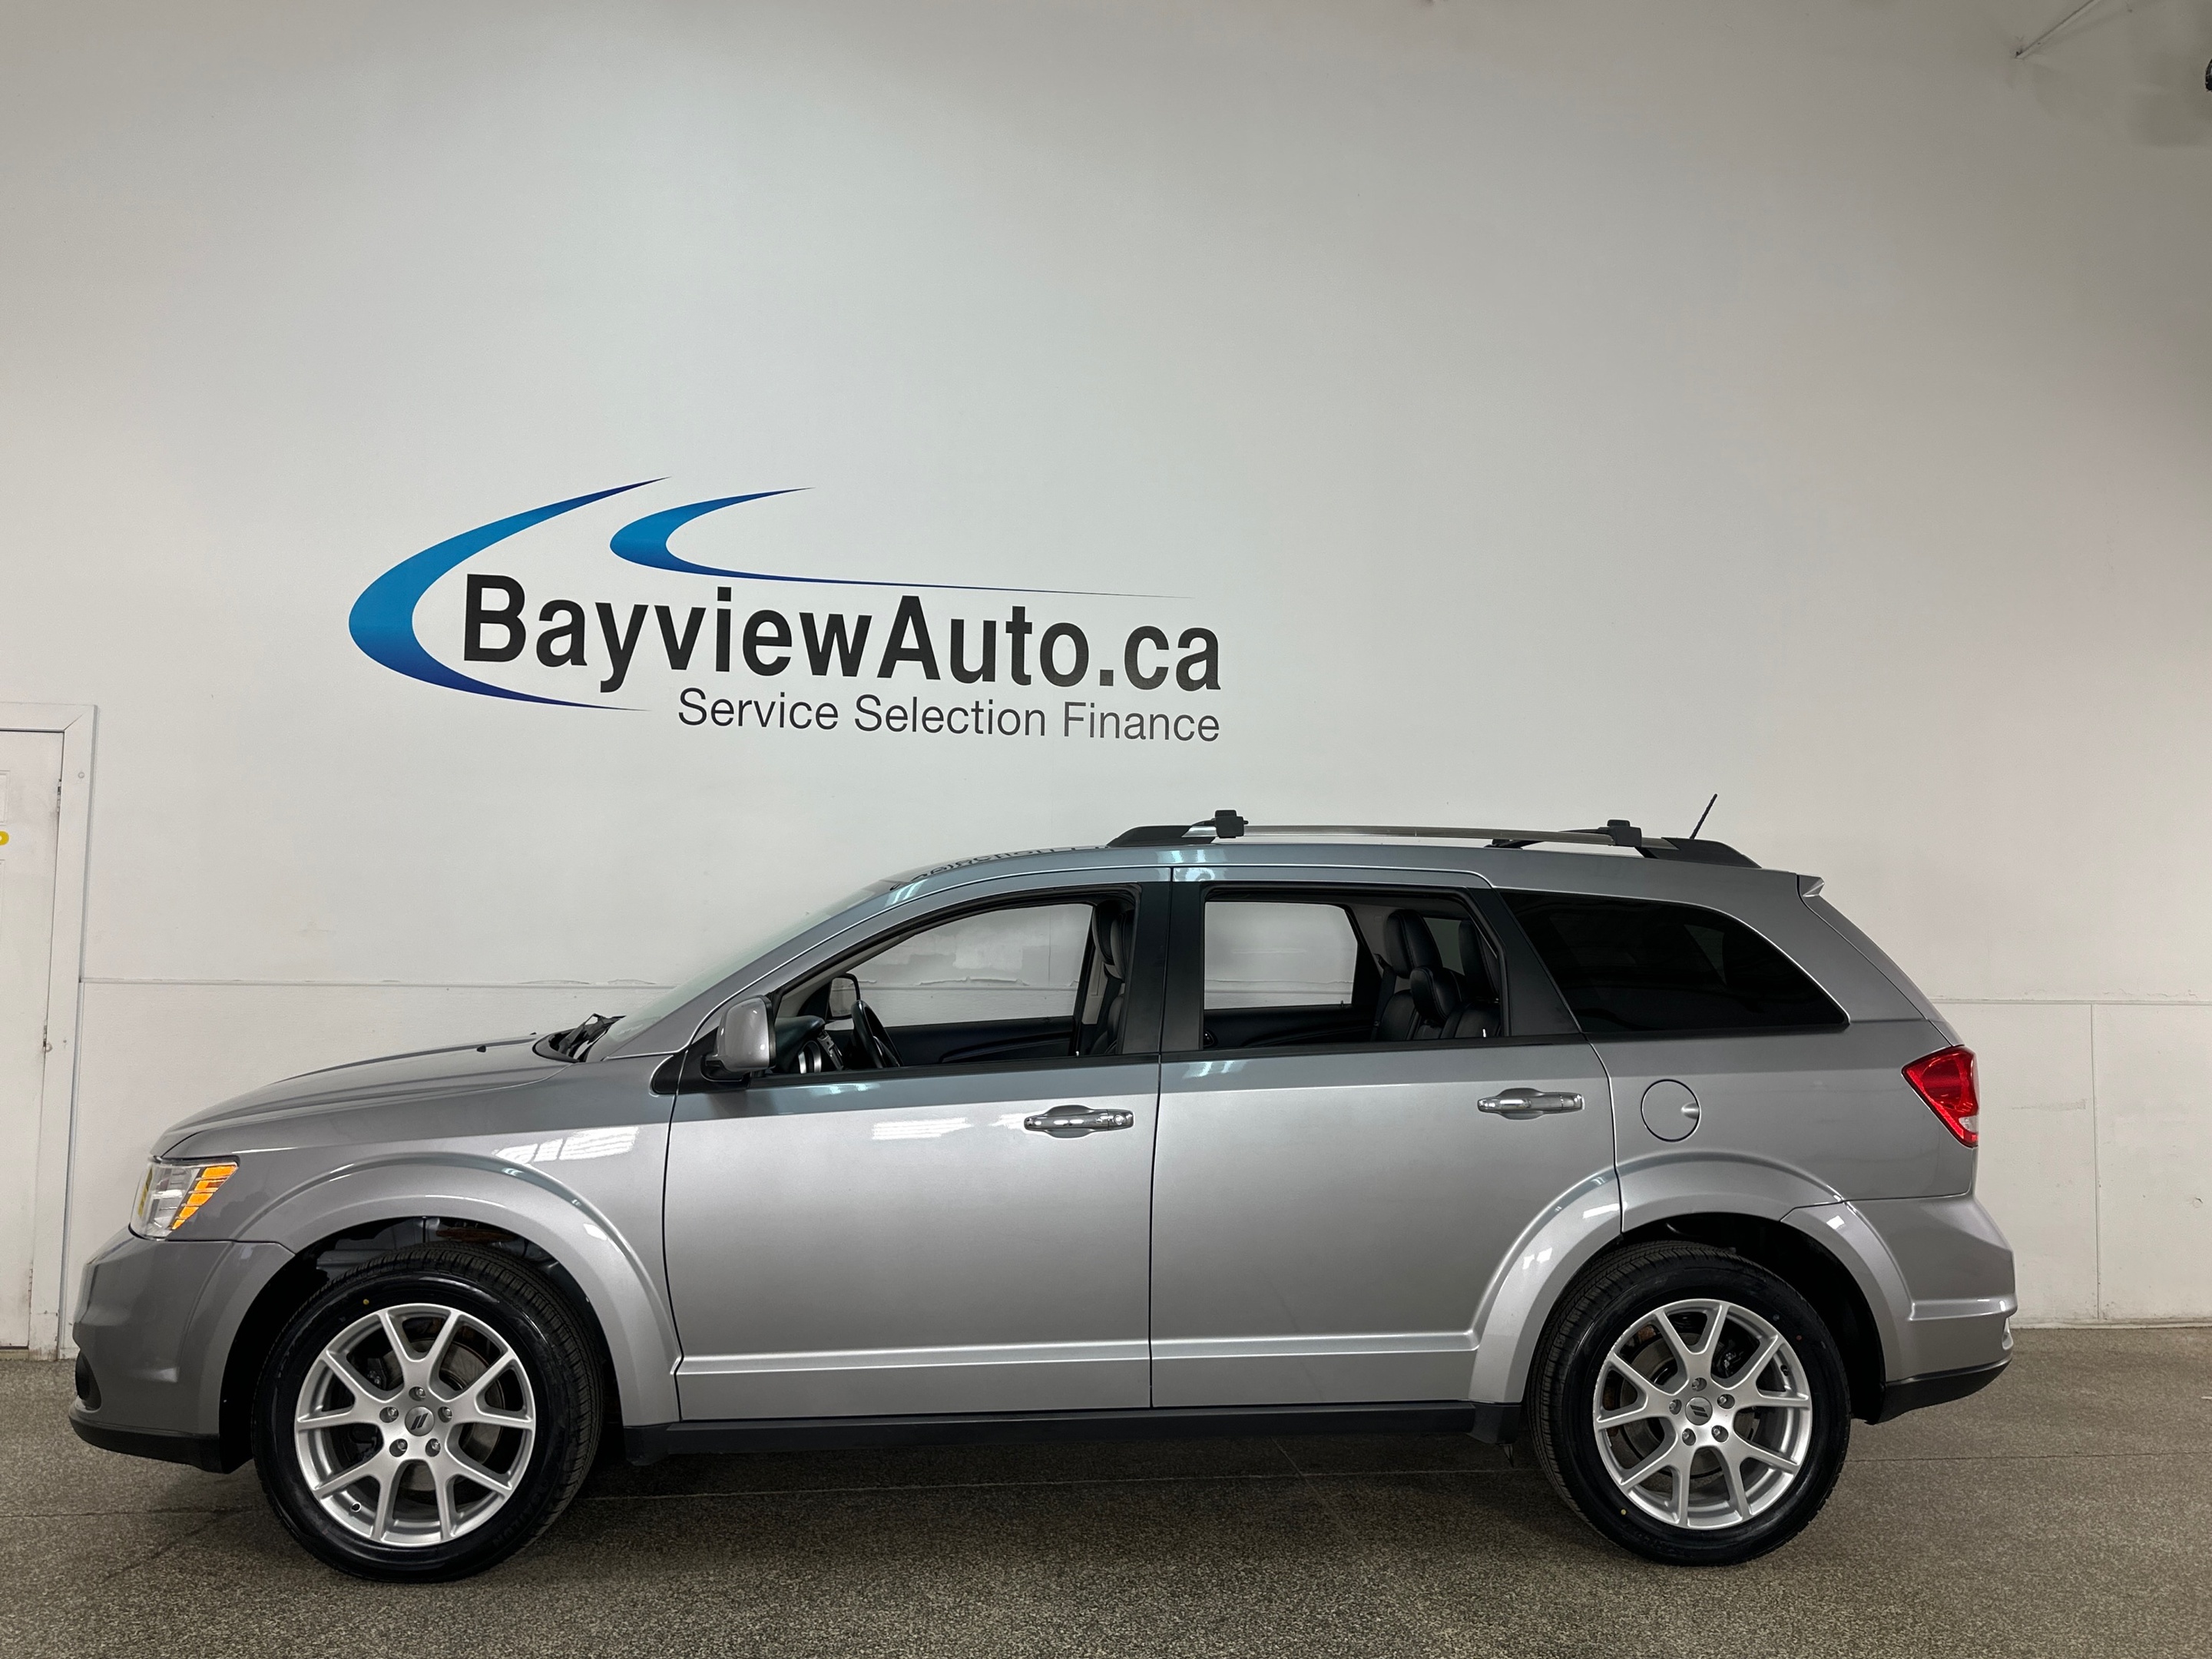 2018 Dodge Journey GT AWD 7 PASS, LEATHER, MORE!